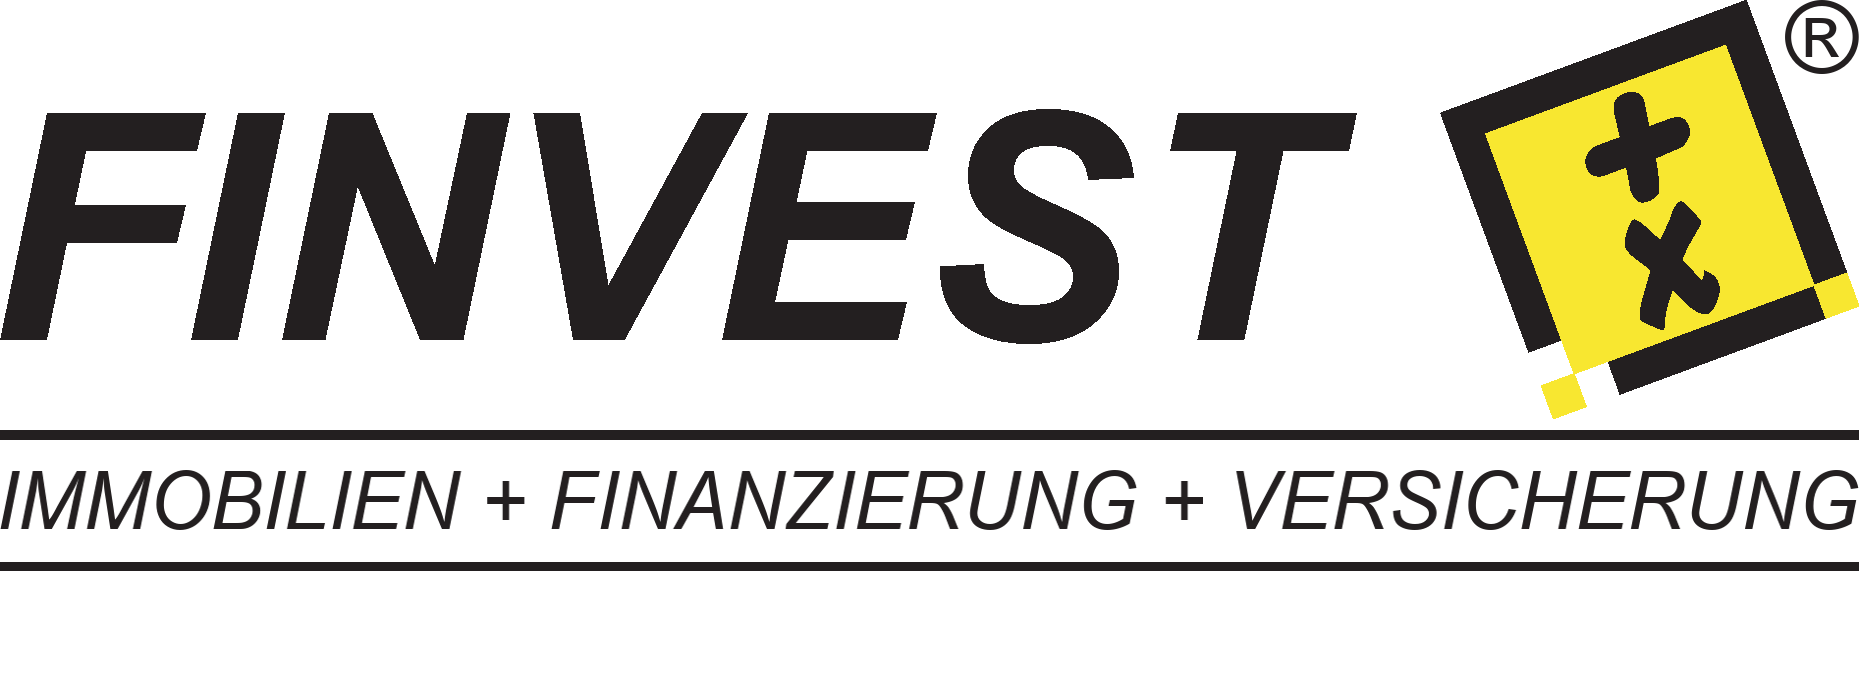 Finvest Immobilien GmbH